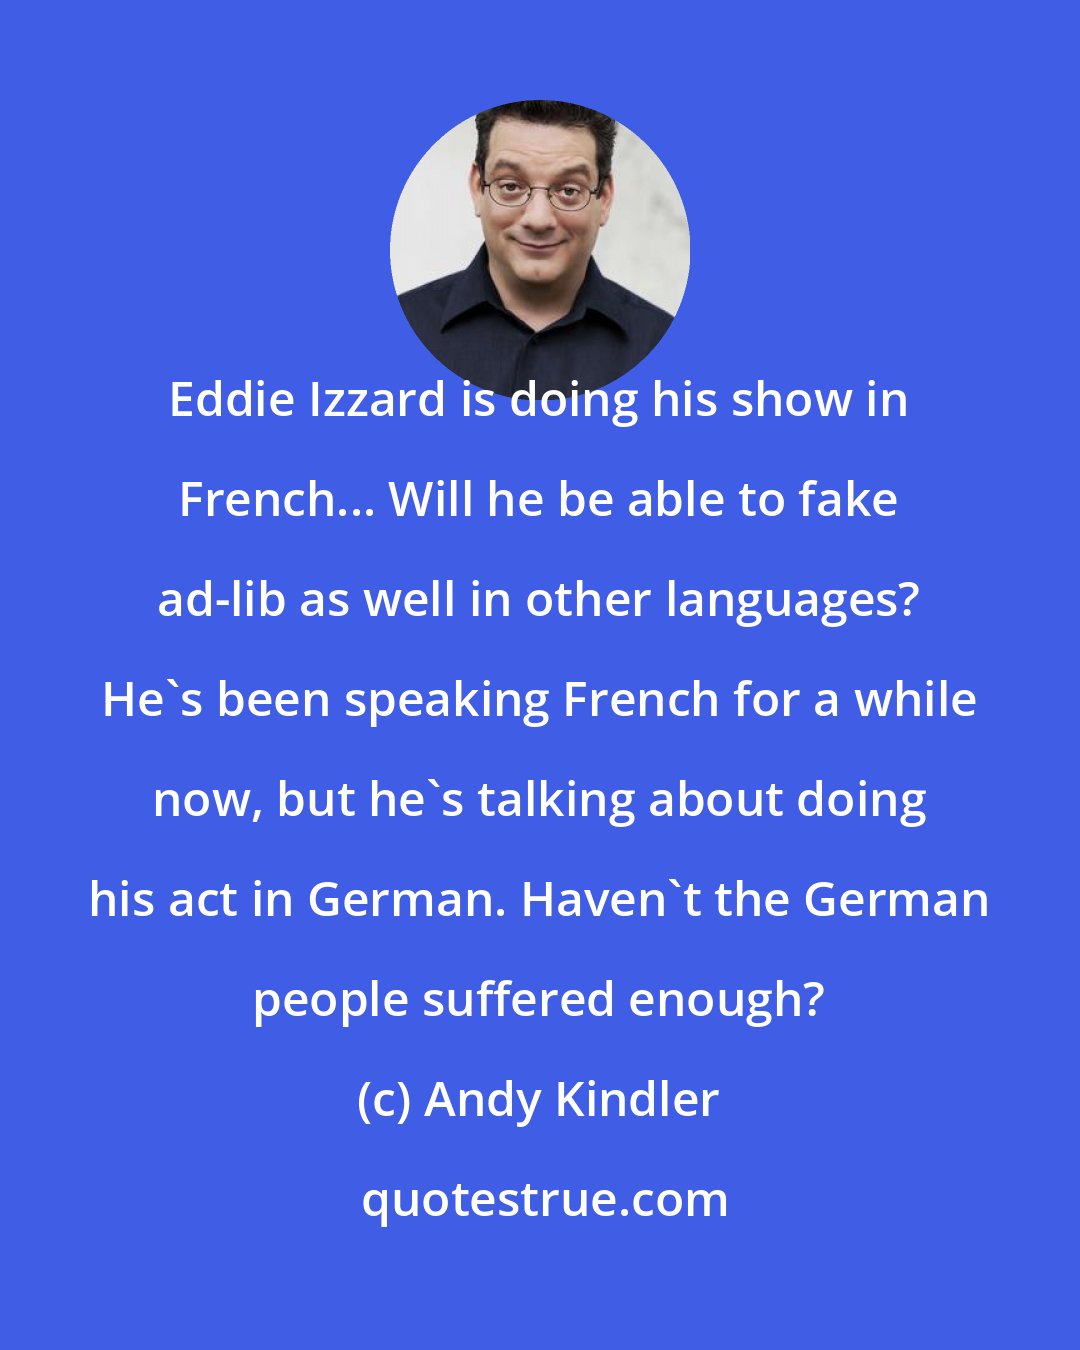 Andy Kindler: Eddie Izzard is doing his show in French... Will he be able to fake ad-lib as well in other languages? He's been speaking French for a while now, but he's talking about doing his act in German. Haven't the German people suffered enough?